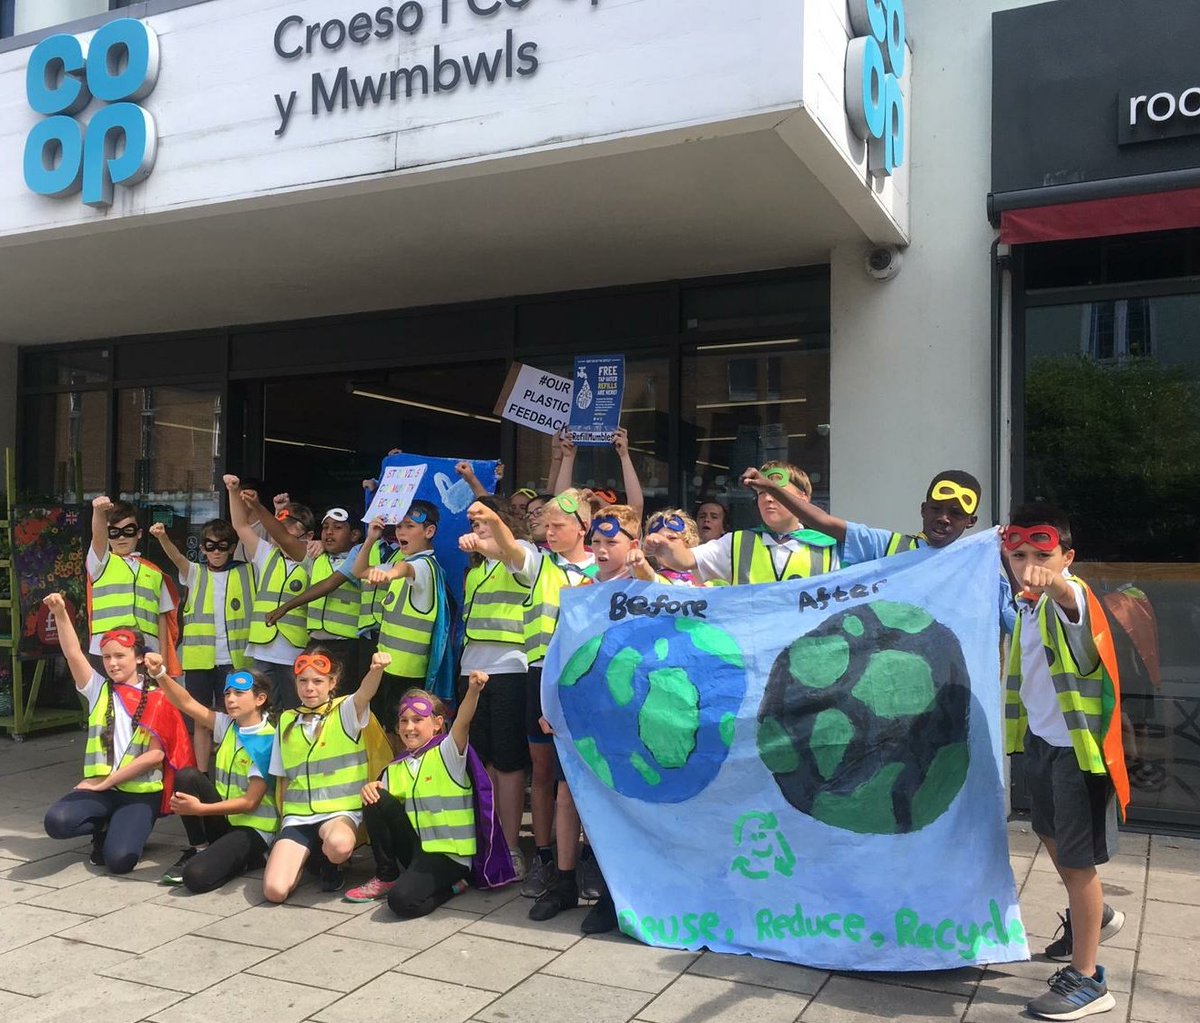 The Zero Heroes of @stdavidscps, inspired by #WarOnPlastic and @HughFW, marched to Mumbles today, to deliver #ourplasticfeedback on unrecyclable, unnecessary plastic waste.
@SwanseaCouncil @SwanseaOnline10 @WalesOnline @964thewave @CoopMumbles @EcoSchoolsWales @Recycle4Wales